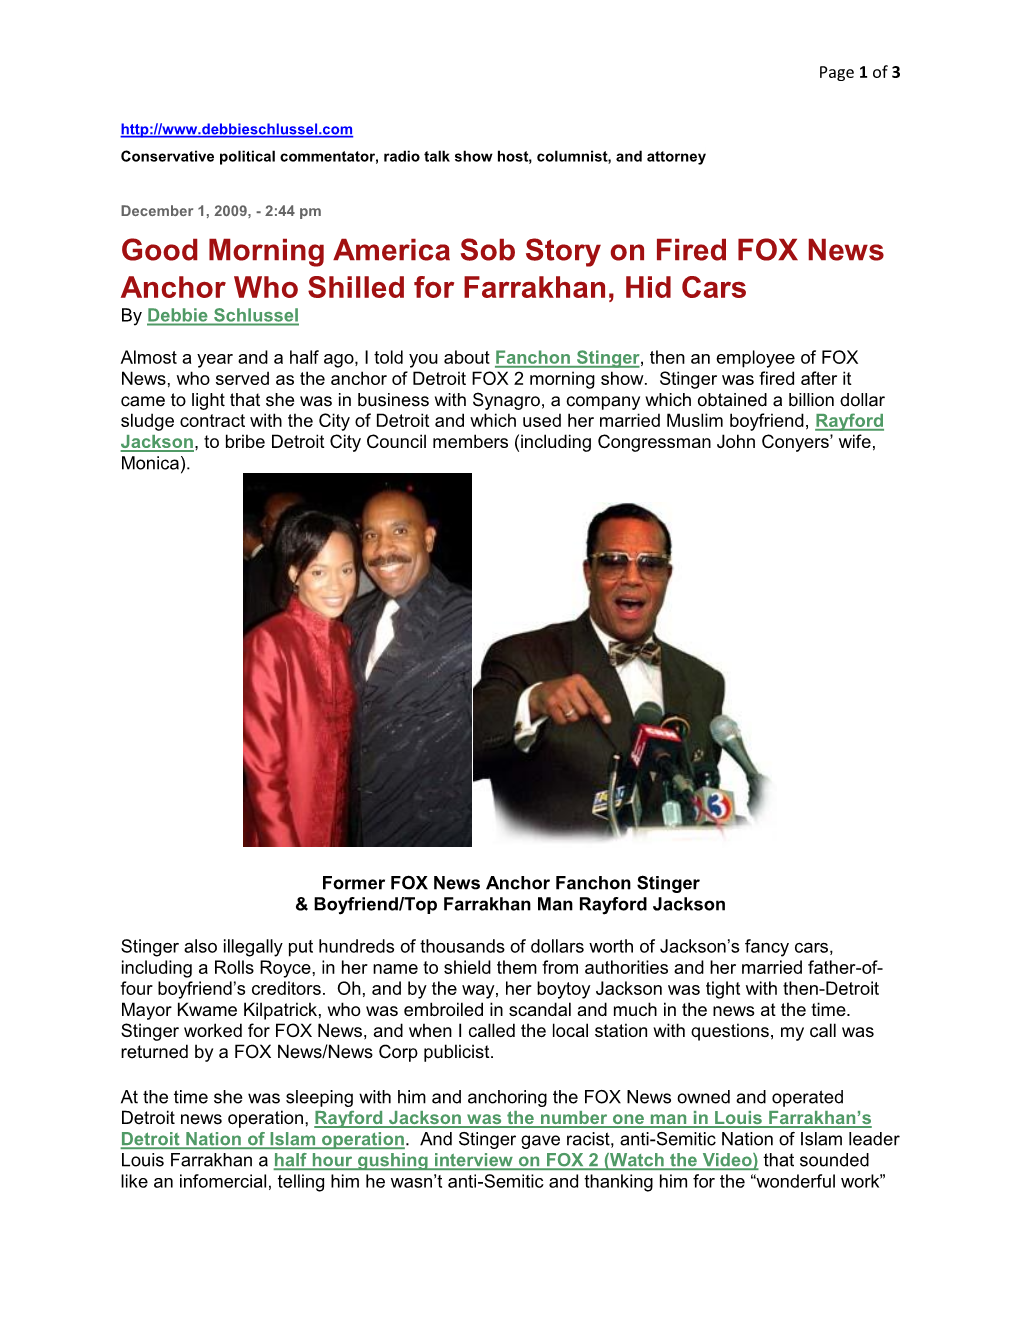 Good Morning America Sob Story on Fired FOX News Anchor Who Shilled for Farrakhan, Hid Cars by Debbie Schlussel